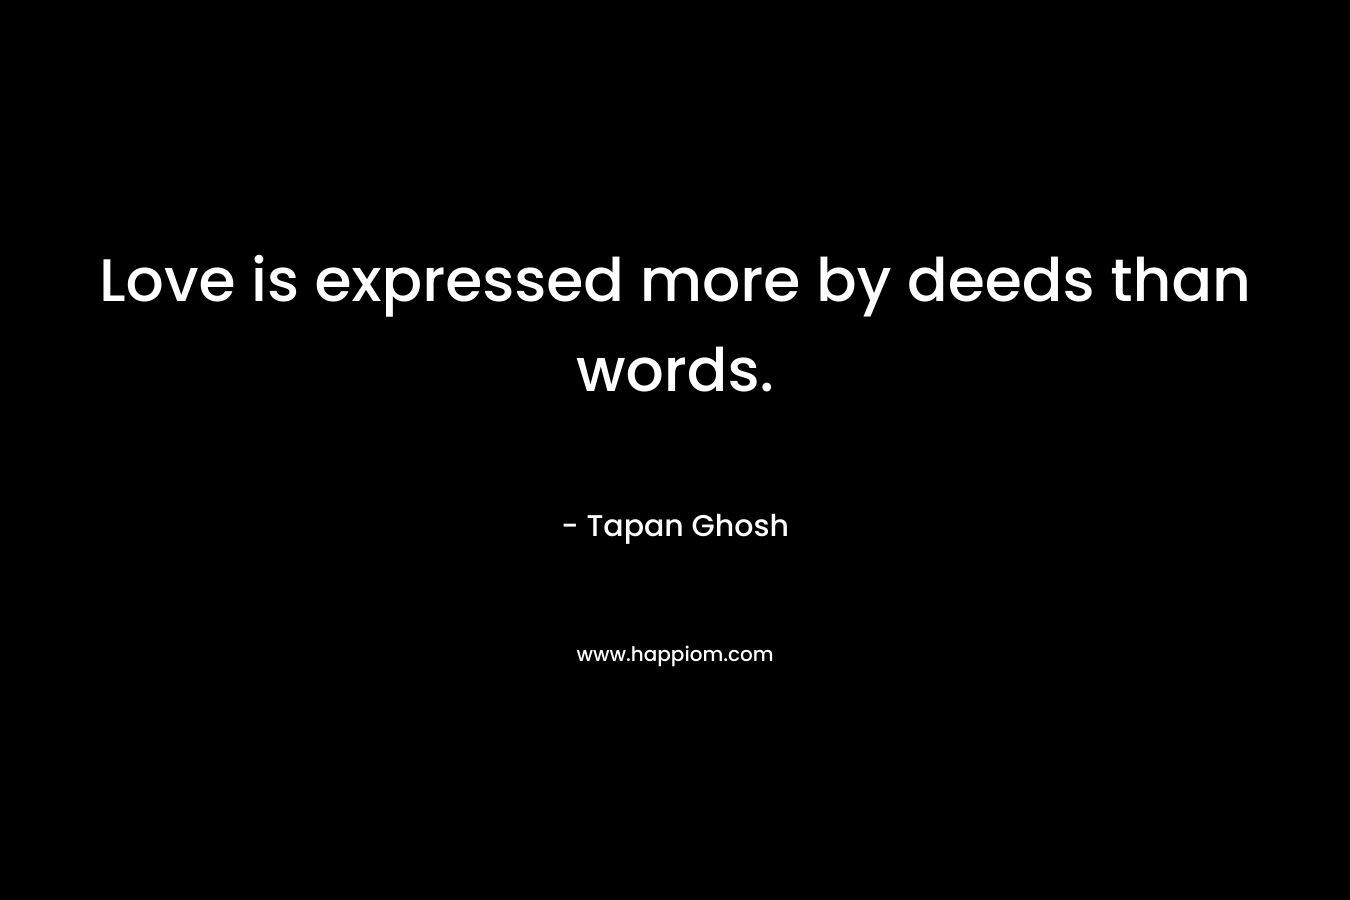 Love is expressed more by deeds than words.